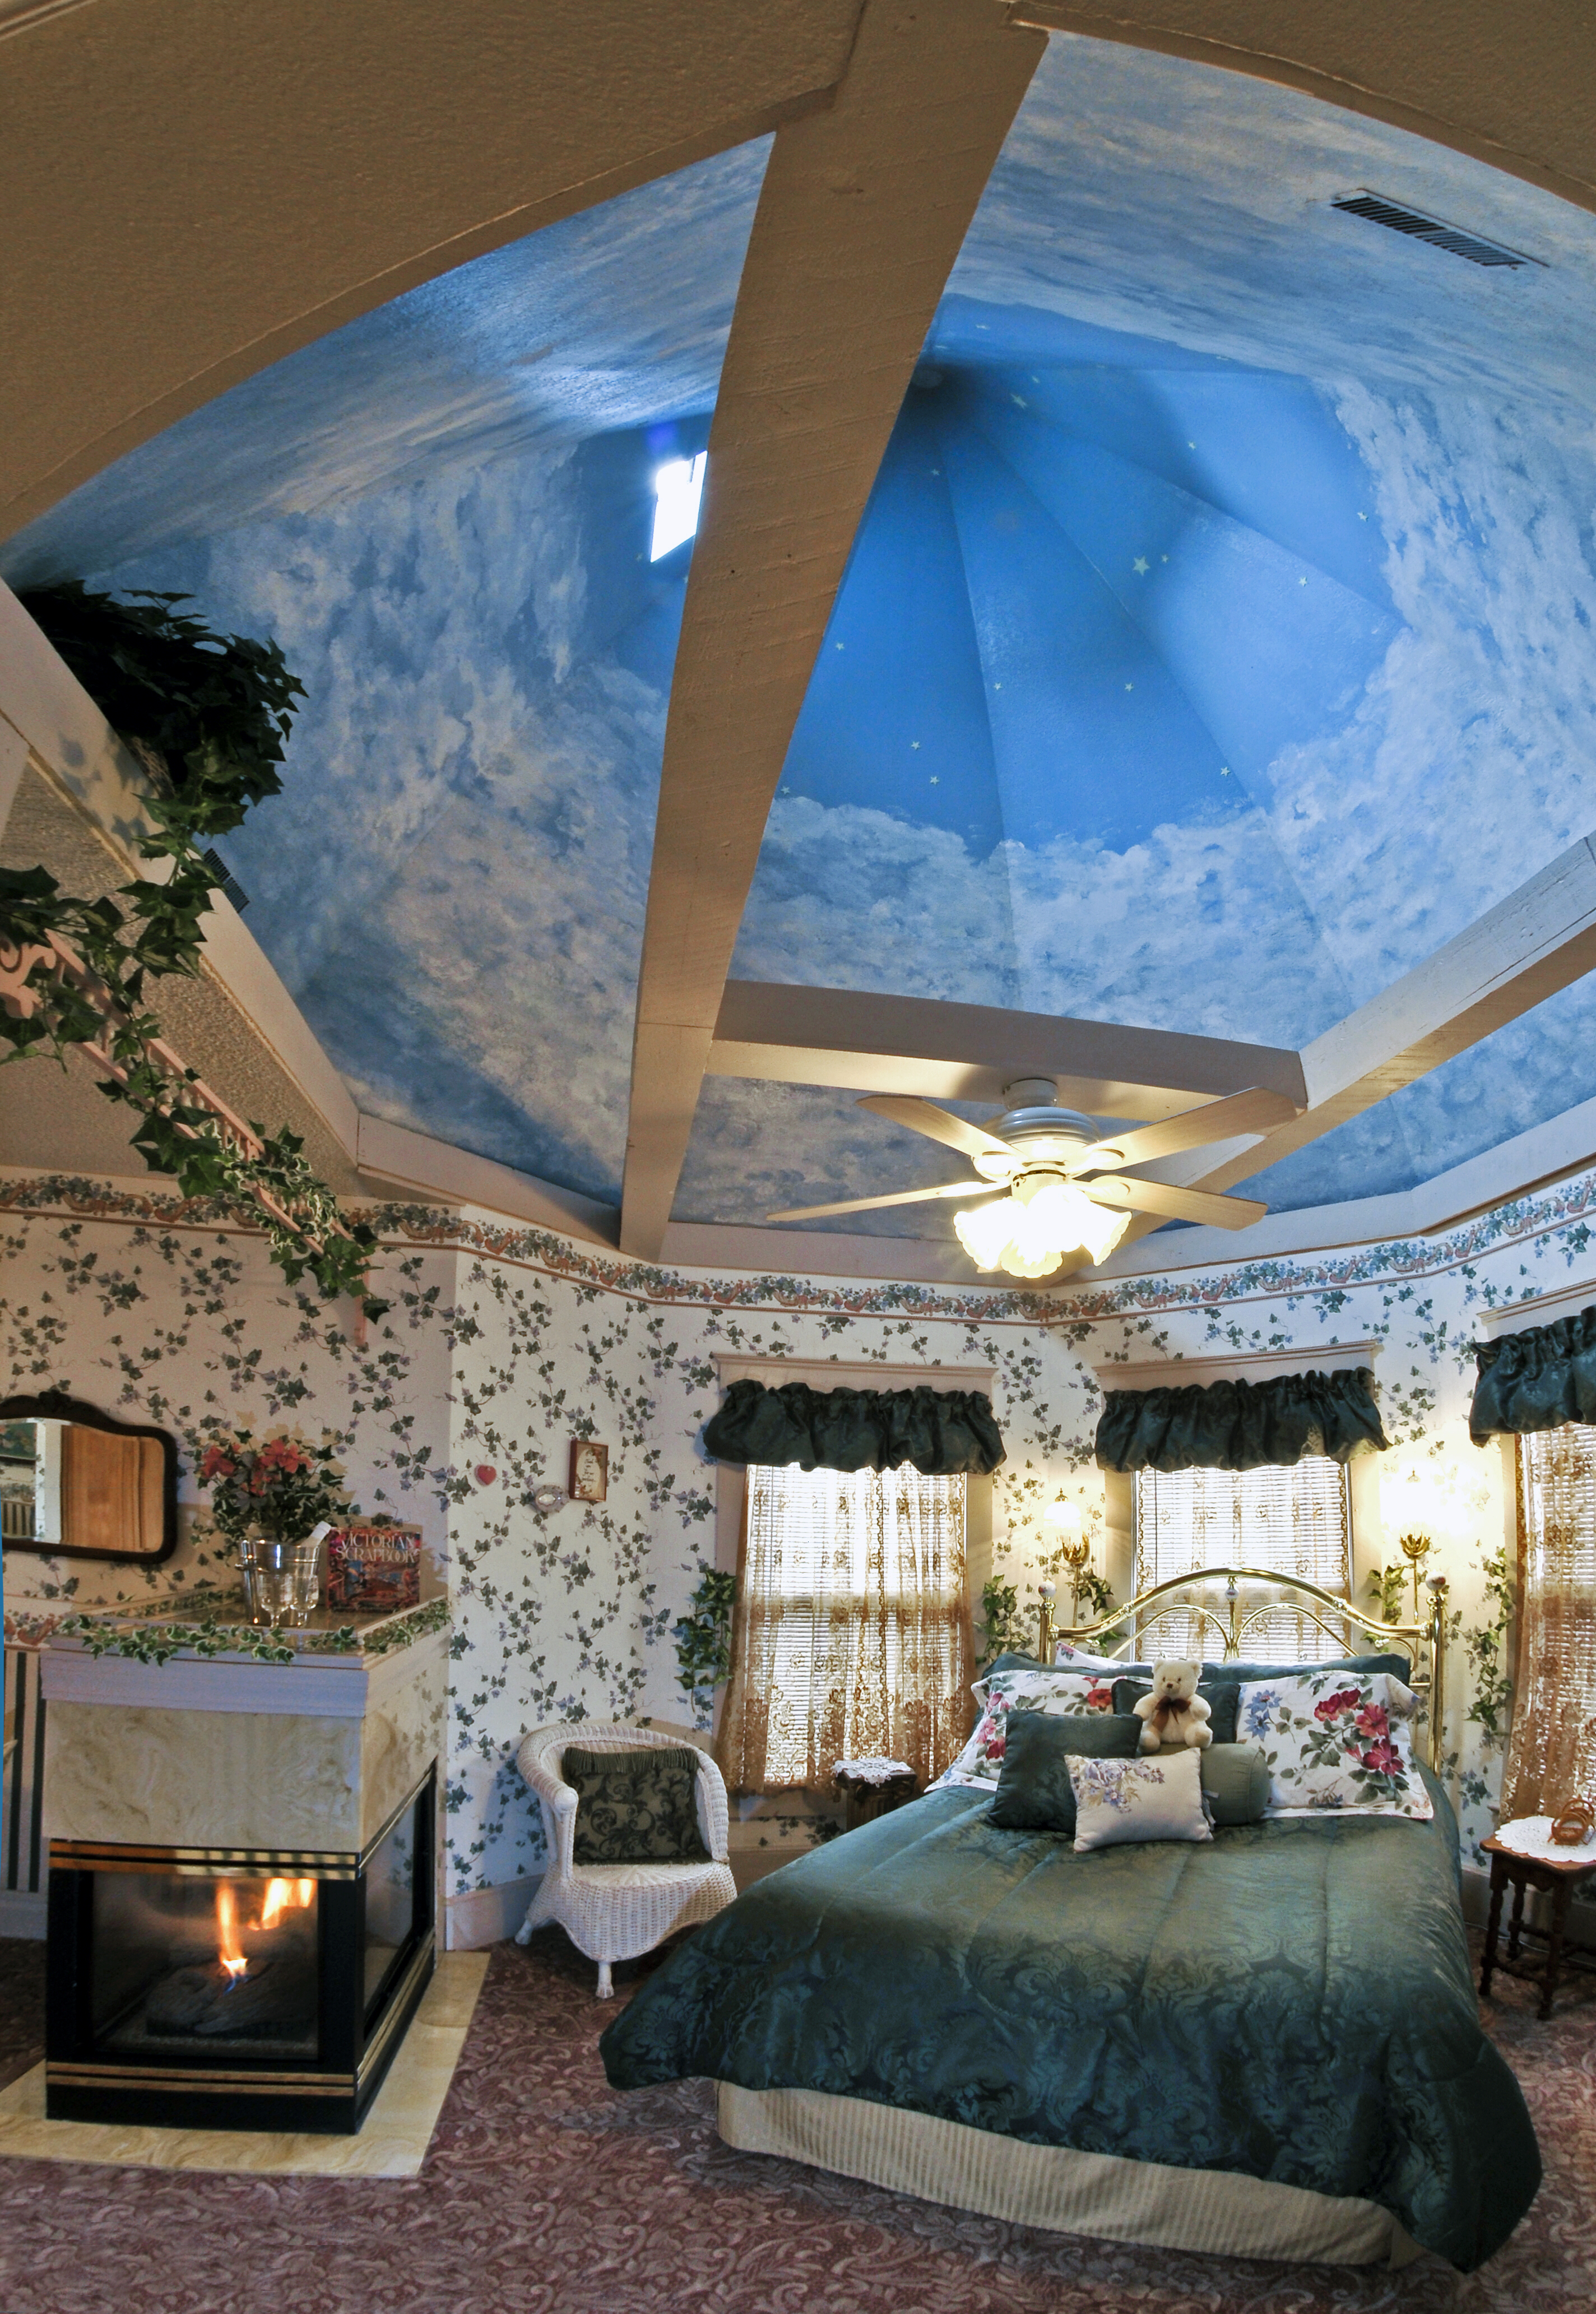 Aspen Suite turret with sky mural